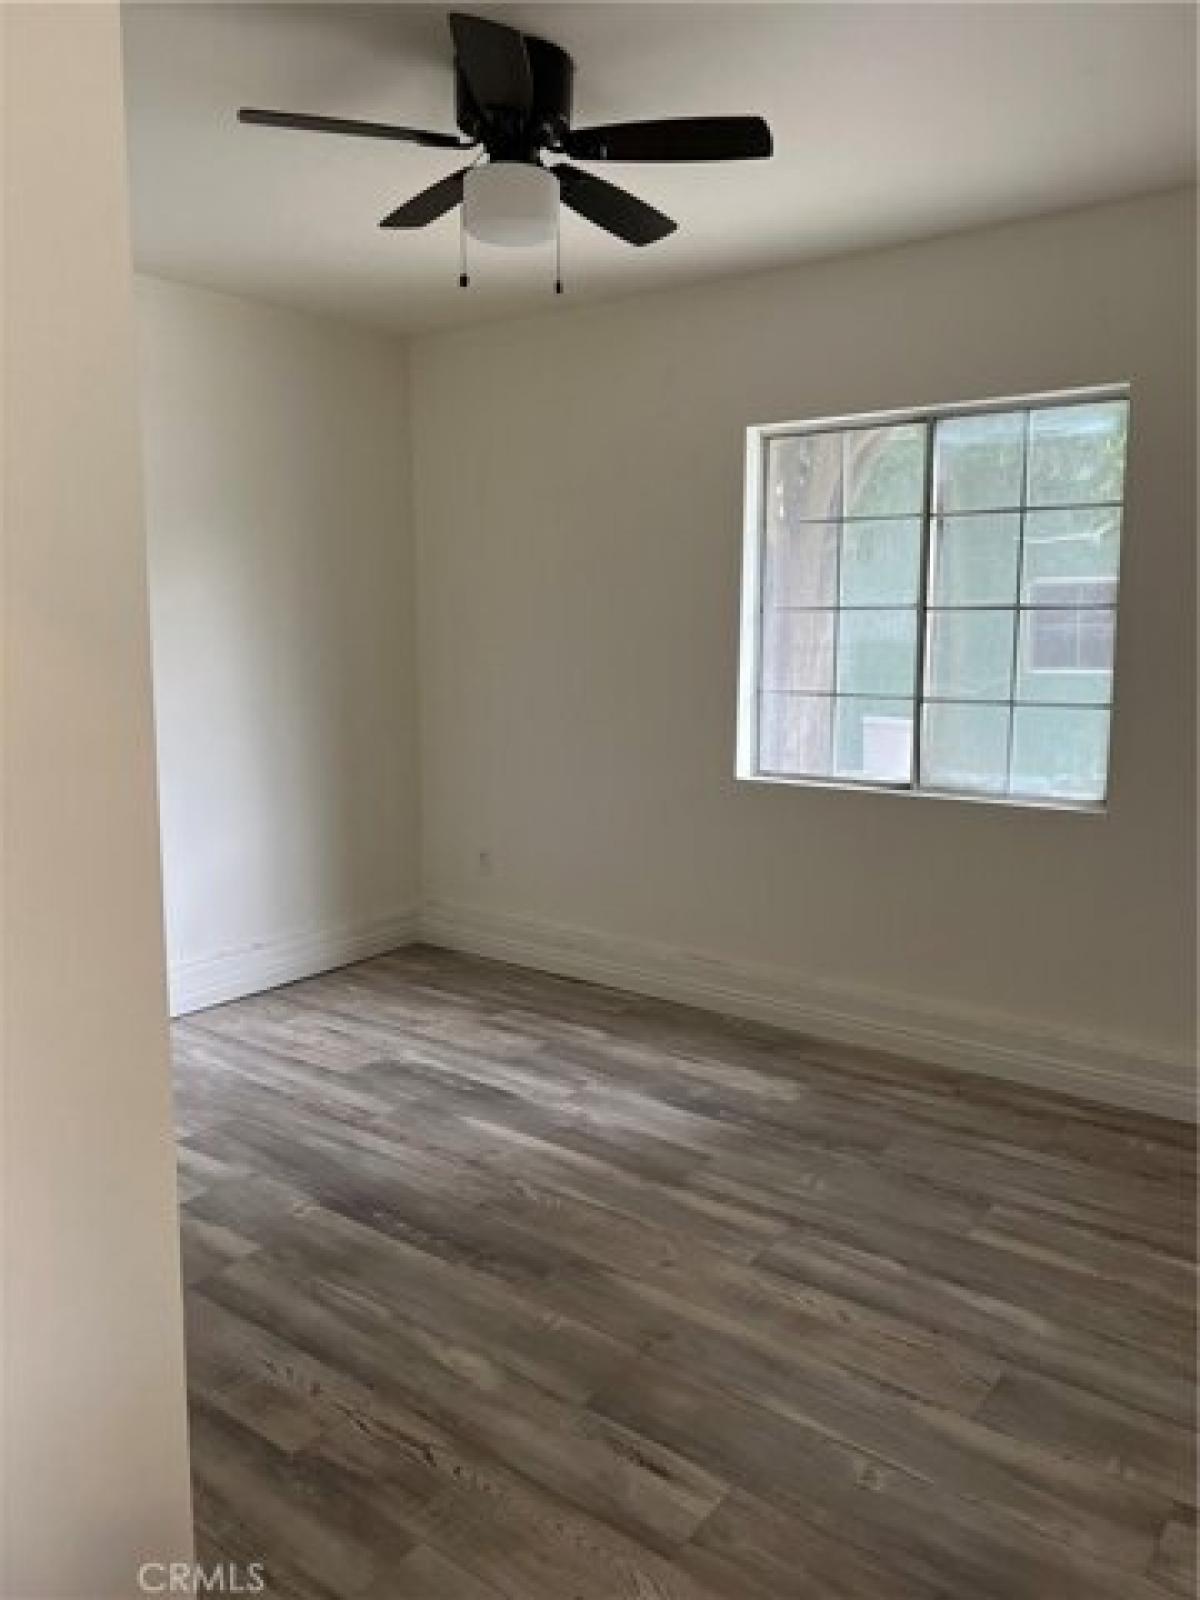 Picture of Home For Rent in South Gate, California, United States